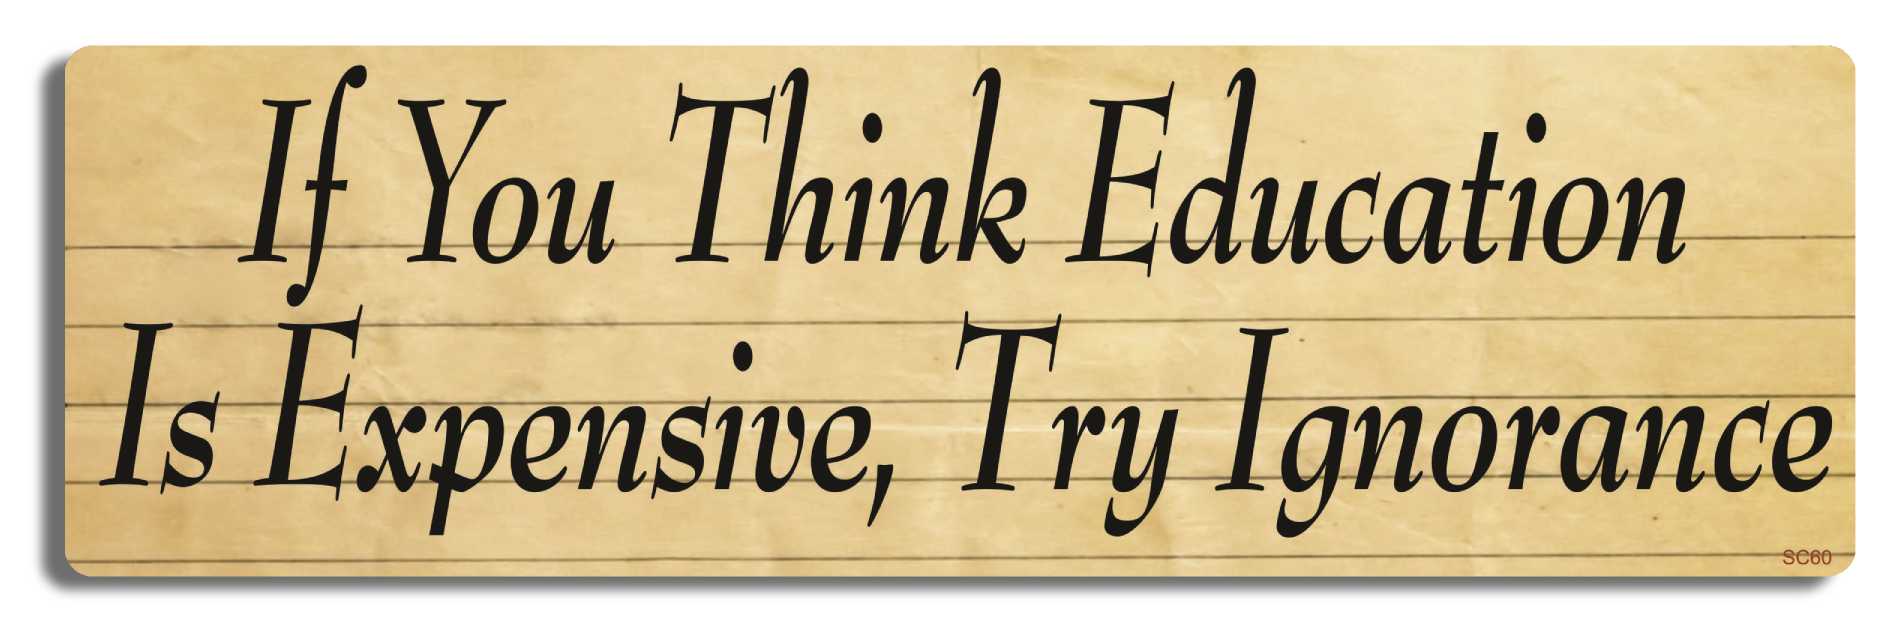 If you think education is expensive, try ignorance - 3" x 10" Bumper Sticker--Car Magnet- -  Decal Bumper Sticker-political Bumper Sticker Car Magnet If you think education is expensive,-  Decal for carseducation, school, teacher